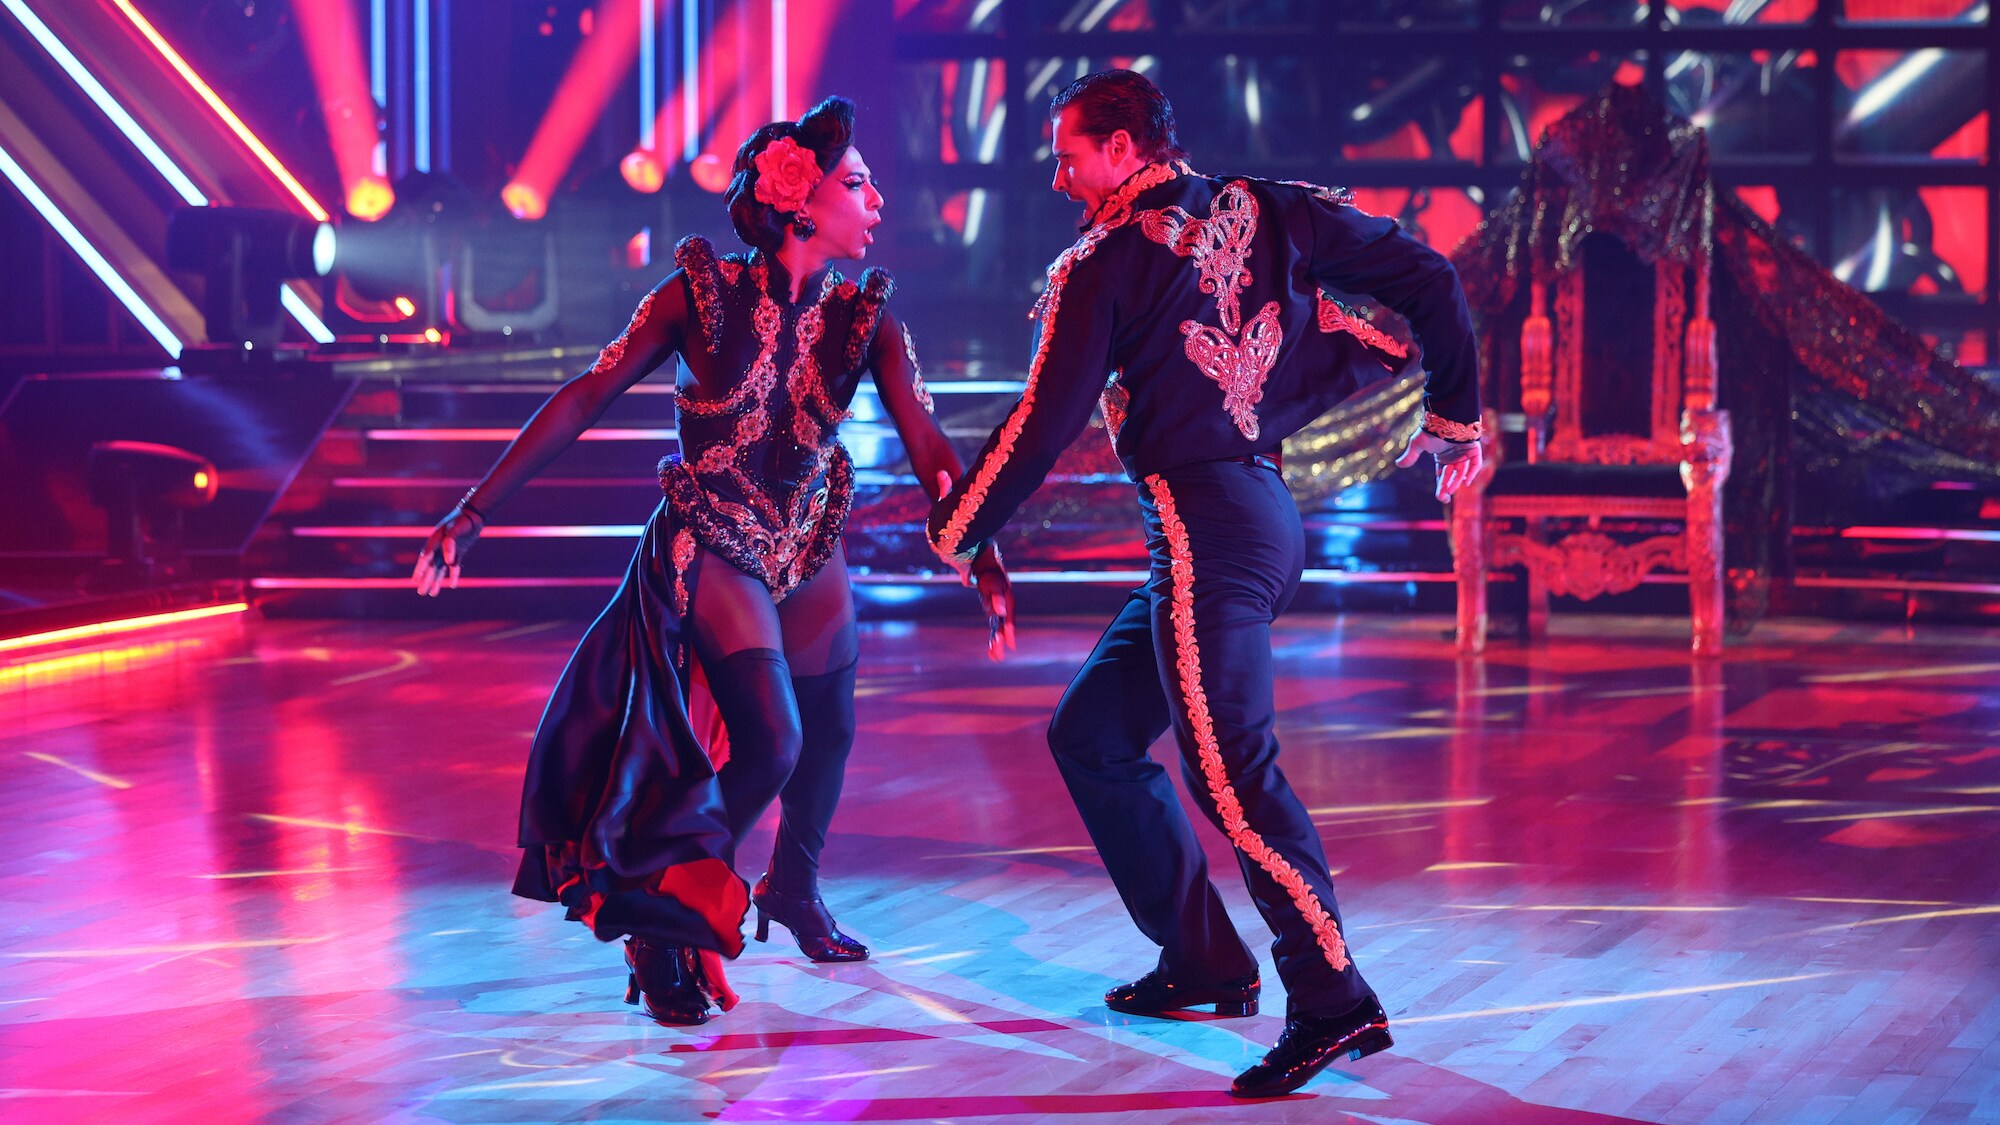 DANCING WITH THE STARS - “Semi-Finals” – The mirrorball competition heats up as the six remaining contestants head into the “Semi-Finals.” Each couple will perform two all-new routines as they fight for a spot in the finale. A new episode of “Dancing with the Stars” will stream live MONDAY, NOV. 14 (8:00pm ET / 5:00pm PT), on Disney+. (ABC/Raymond Liu) SHANGELA, GLEB SAVCHENKO